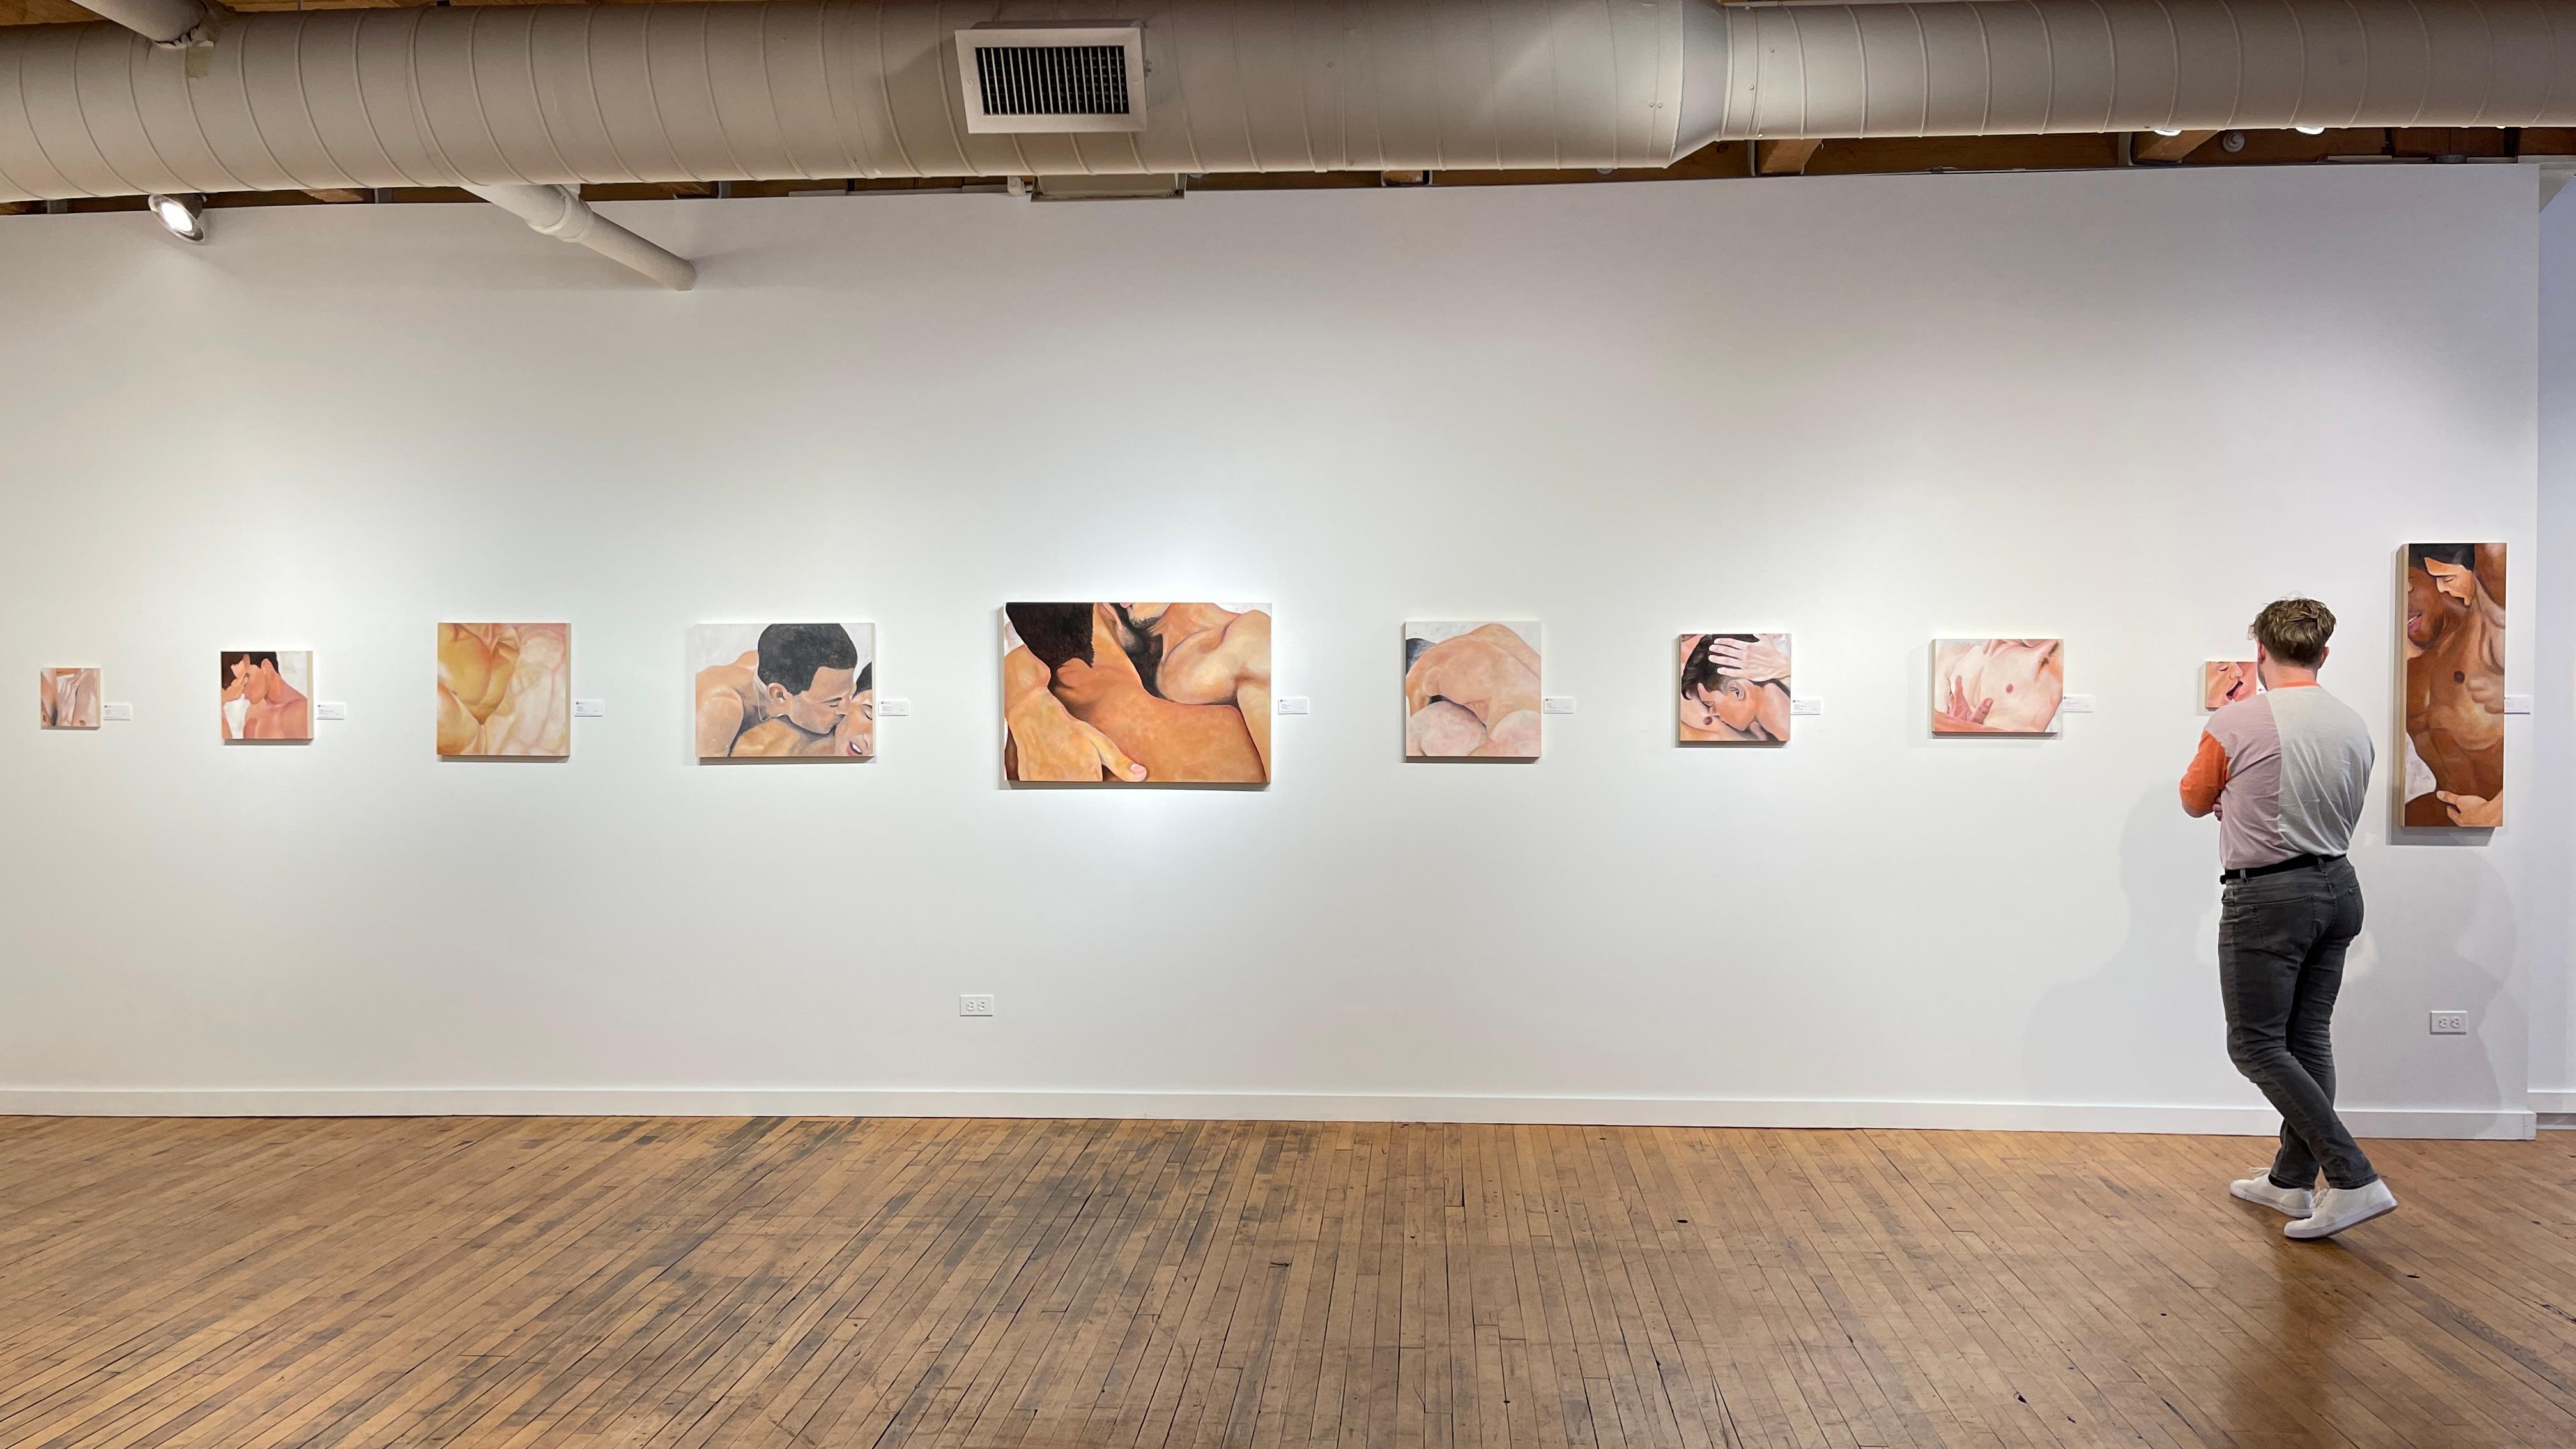 Using pornography as a vehicle for understanding, Rick Sindt's work explores the discovery and development of queer attraction. Sindt transforms pornographic stills, repurposing them into images of intimacy.

Rick Sindt
Glimpse of Something That